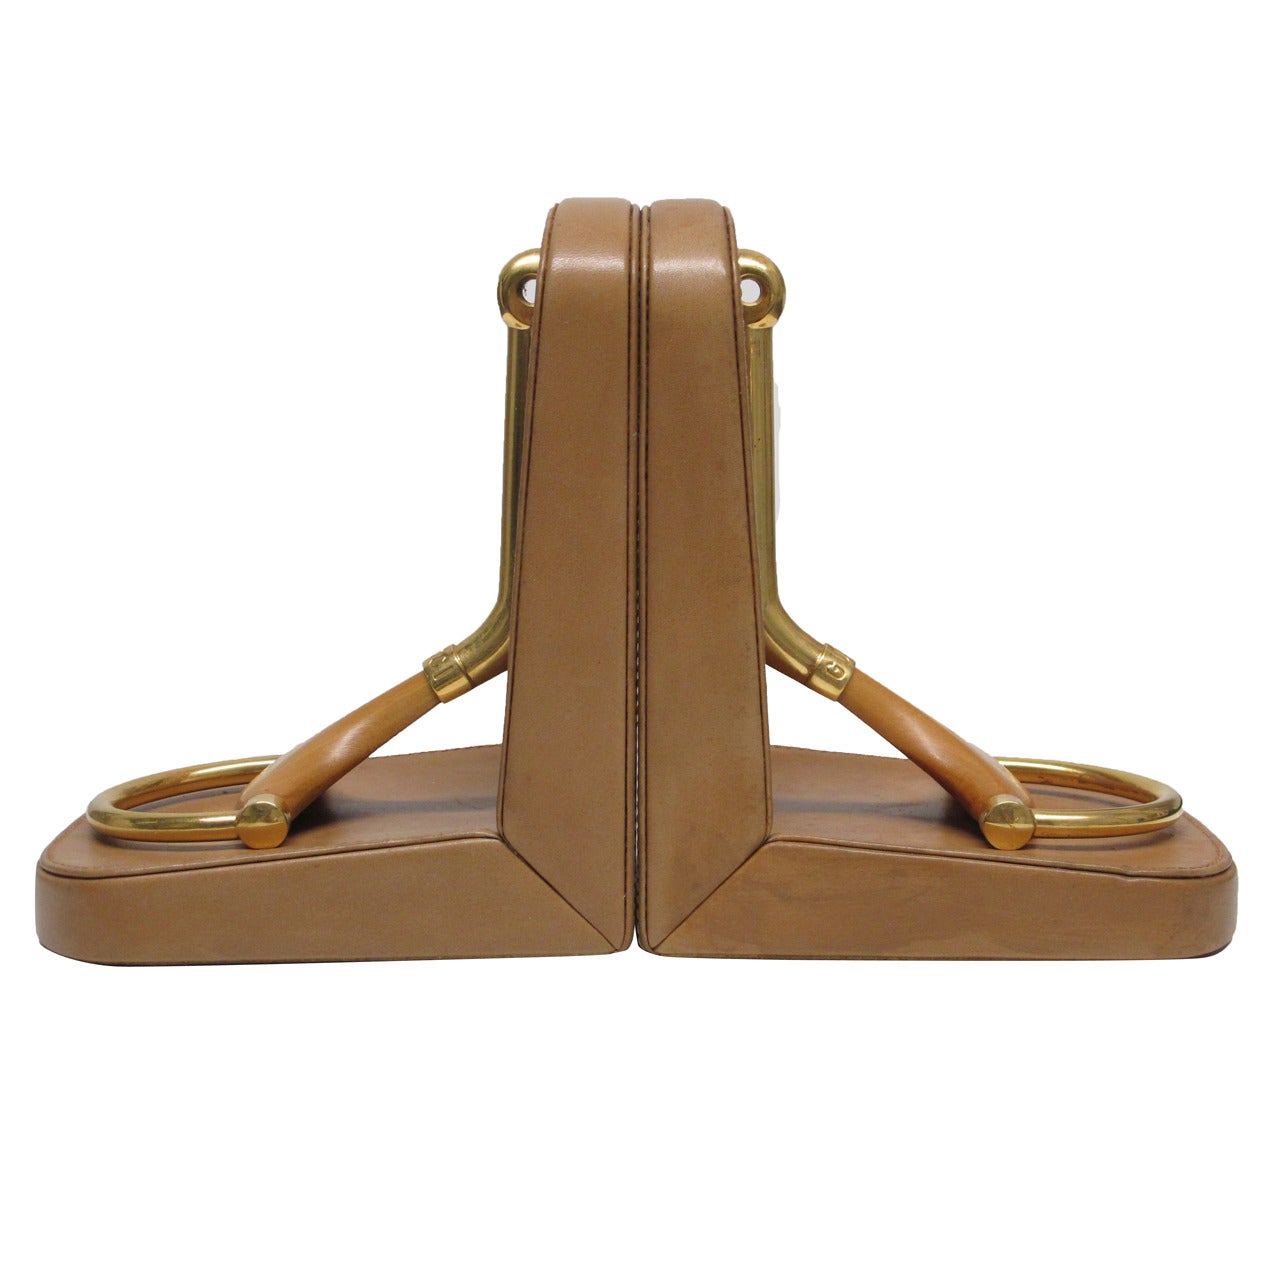 Horsebit Gucci Bookends in Brass, Wood and Leather